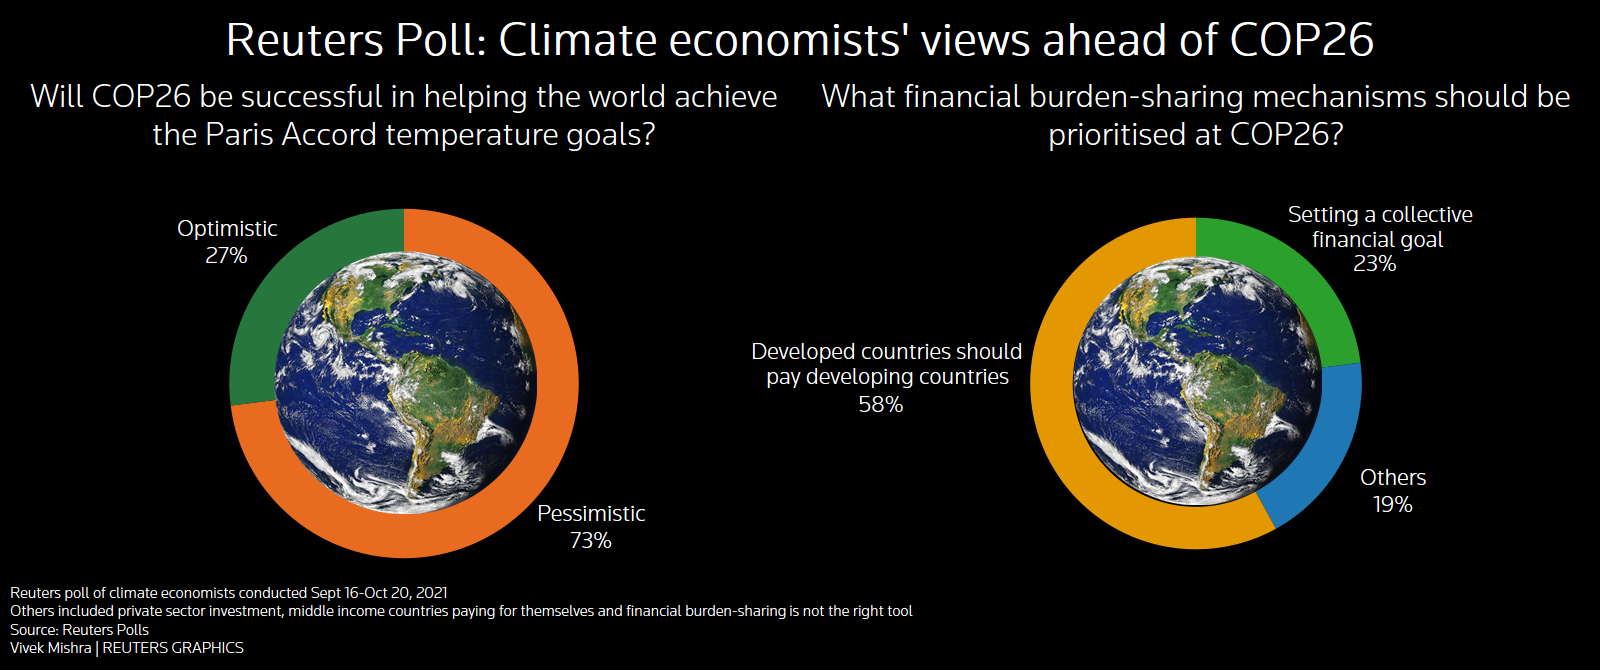 Reuters poll graphic on economists' views on COP26: